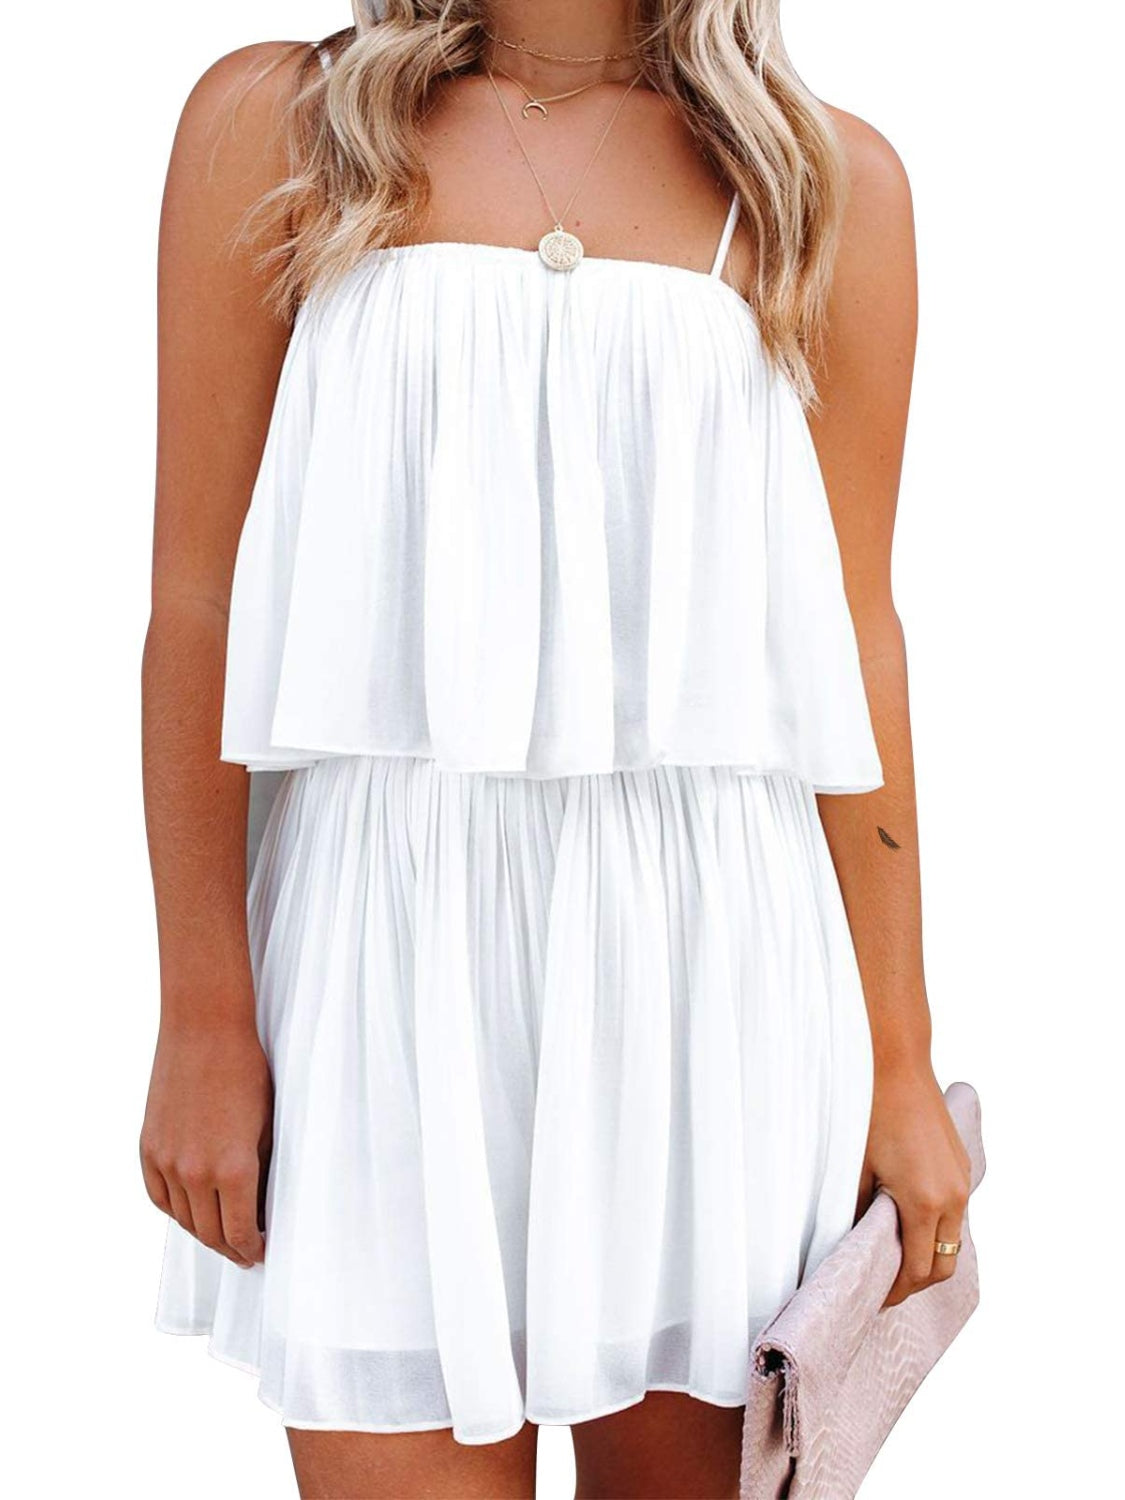 Sunset Vacation  Ruched Spaghetti Strap Romper  Sunset and Swim   